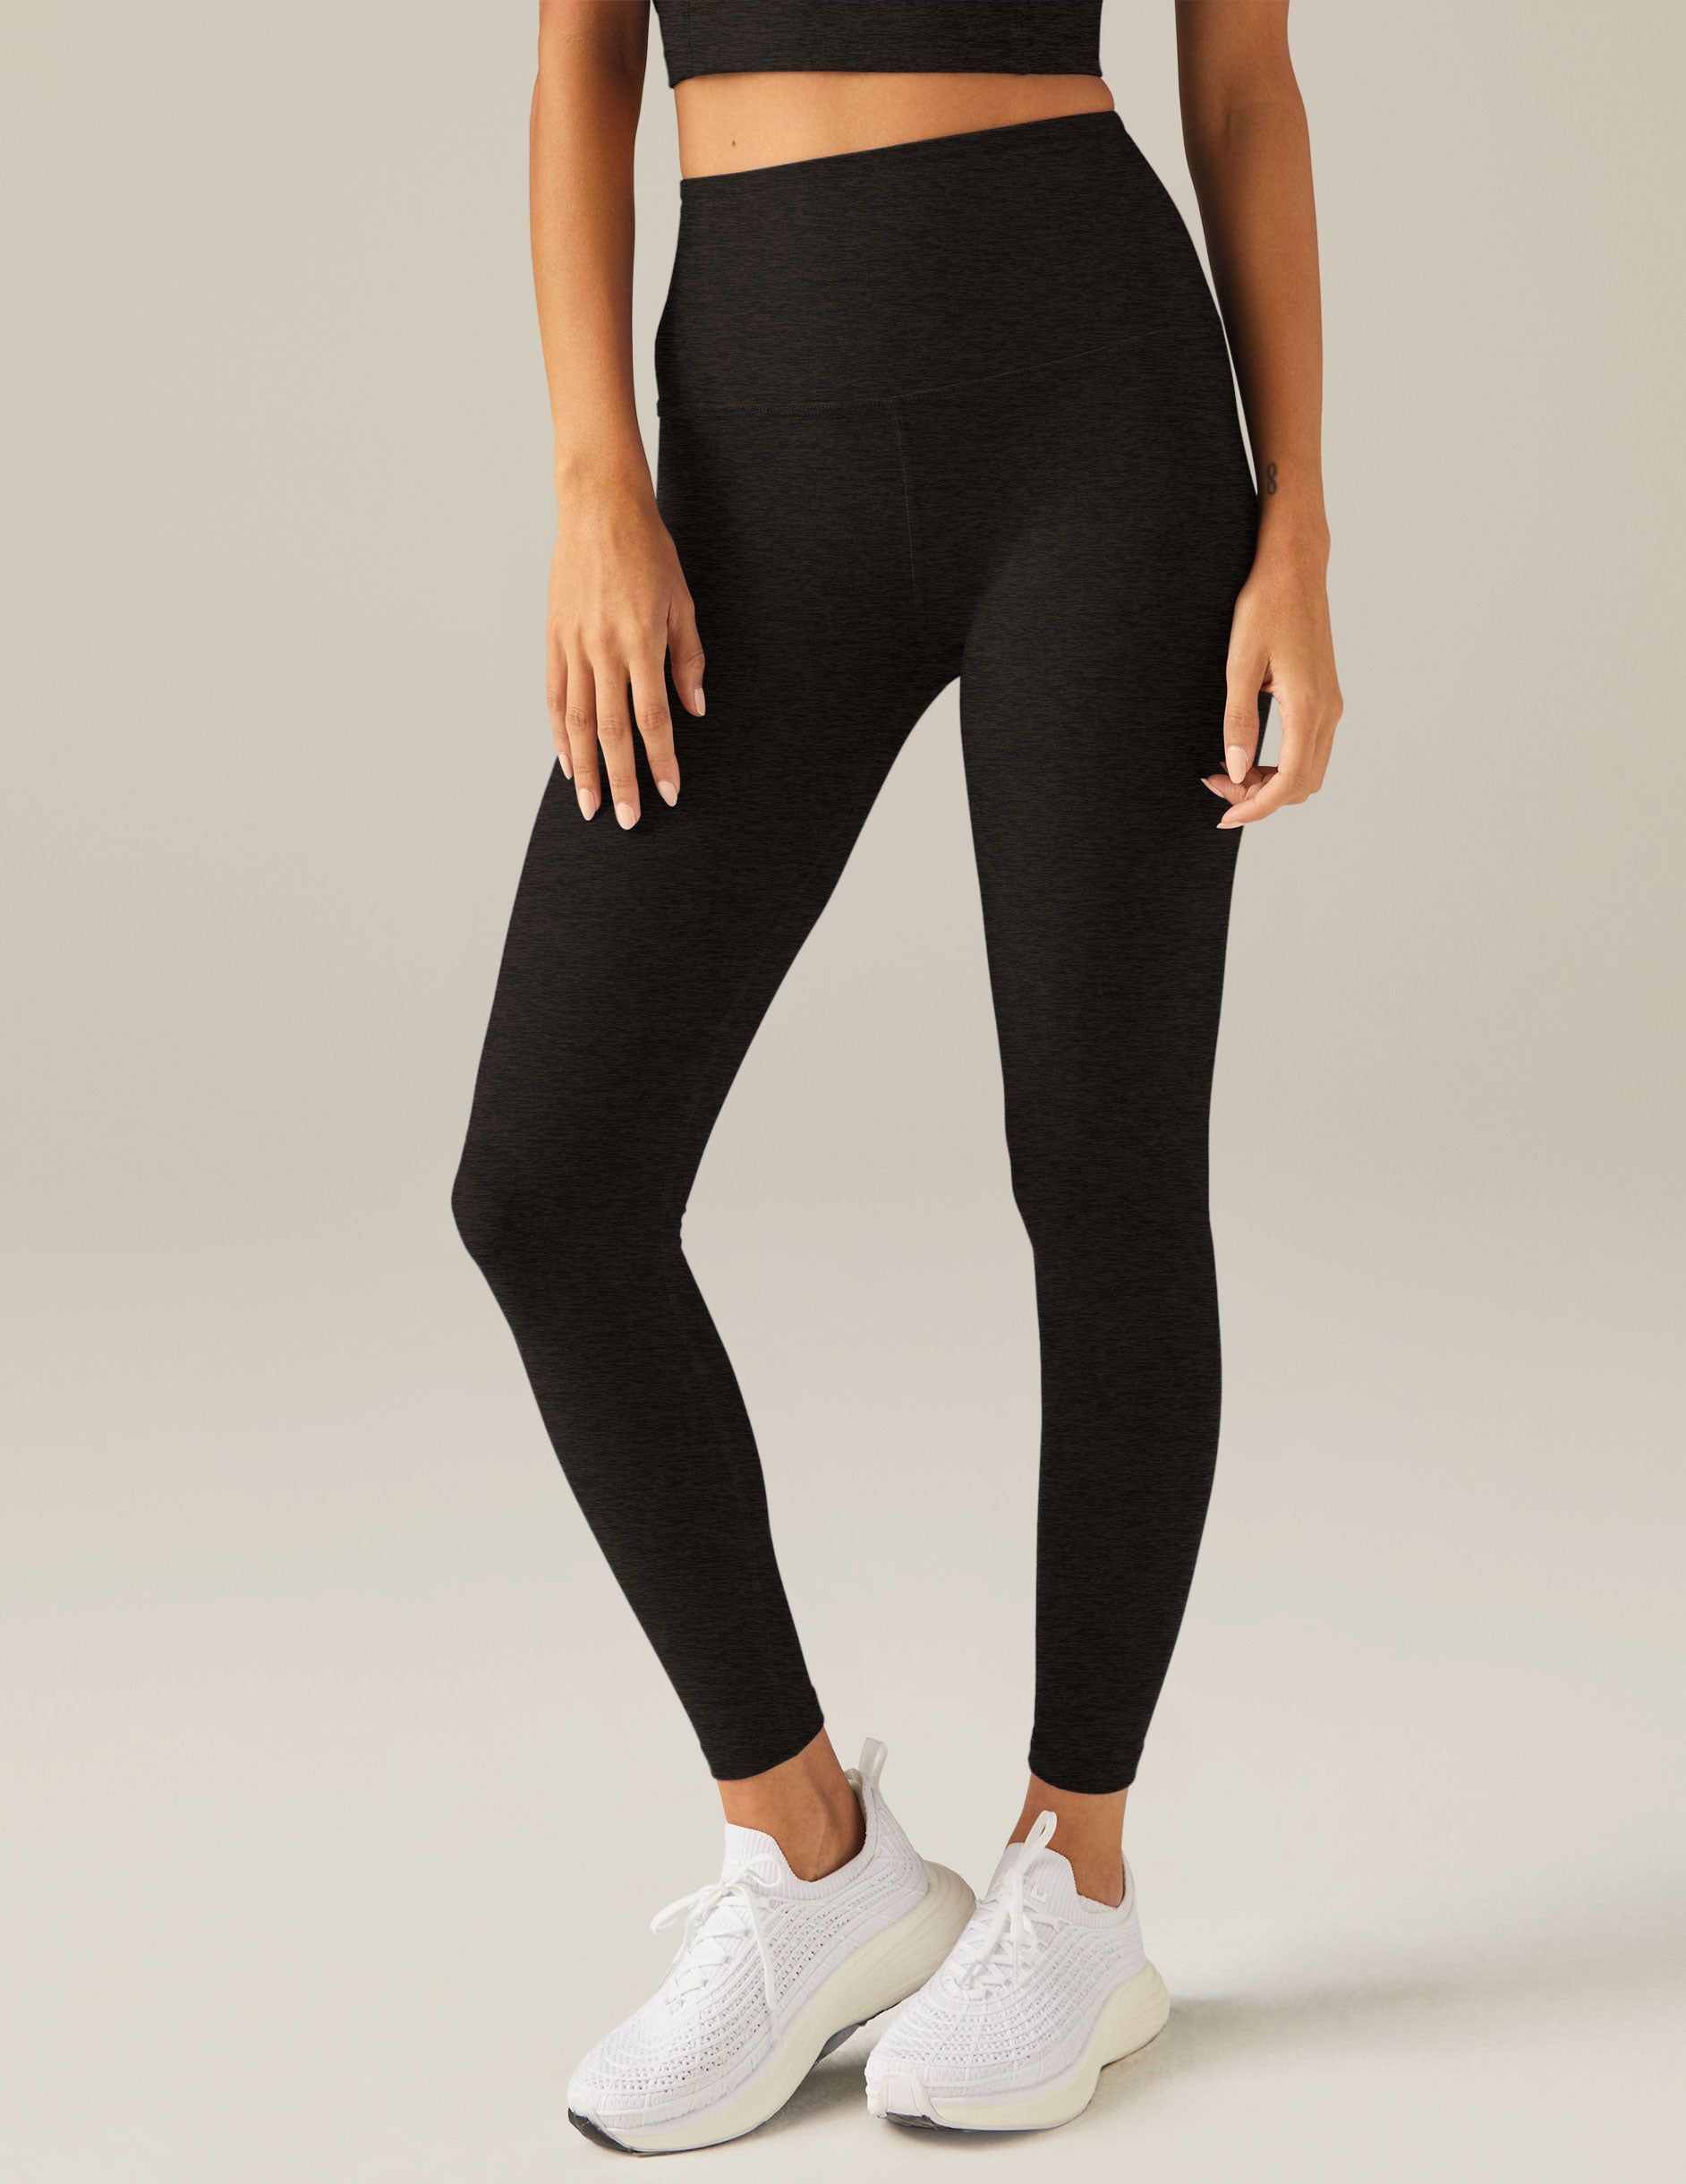 The 10 Best Leggings With Pockets in 2023